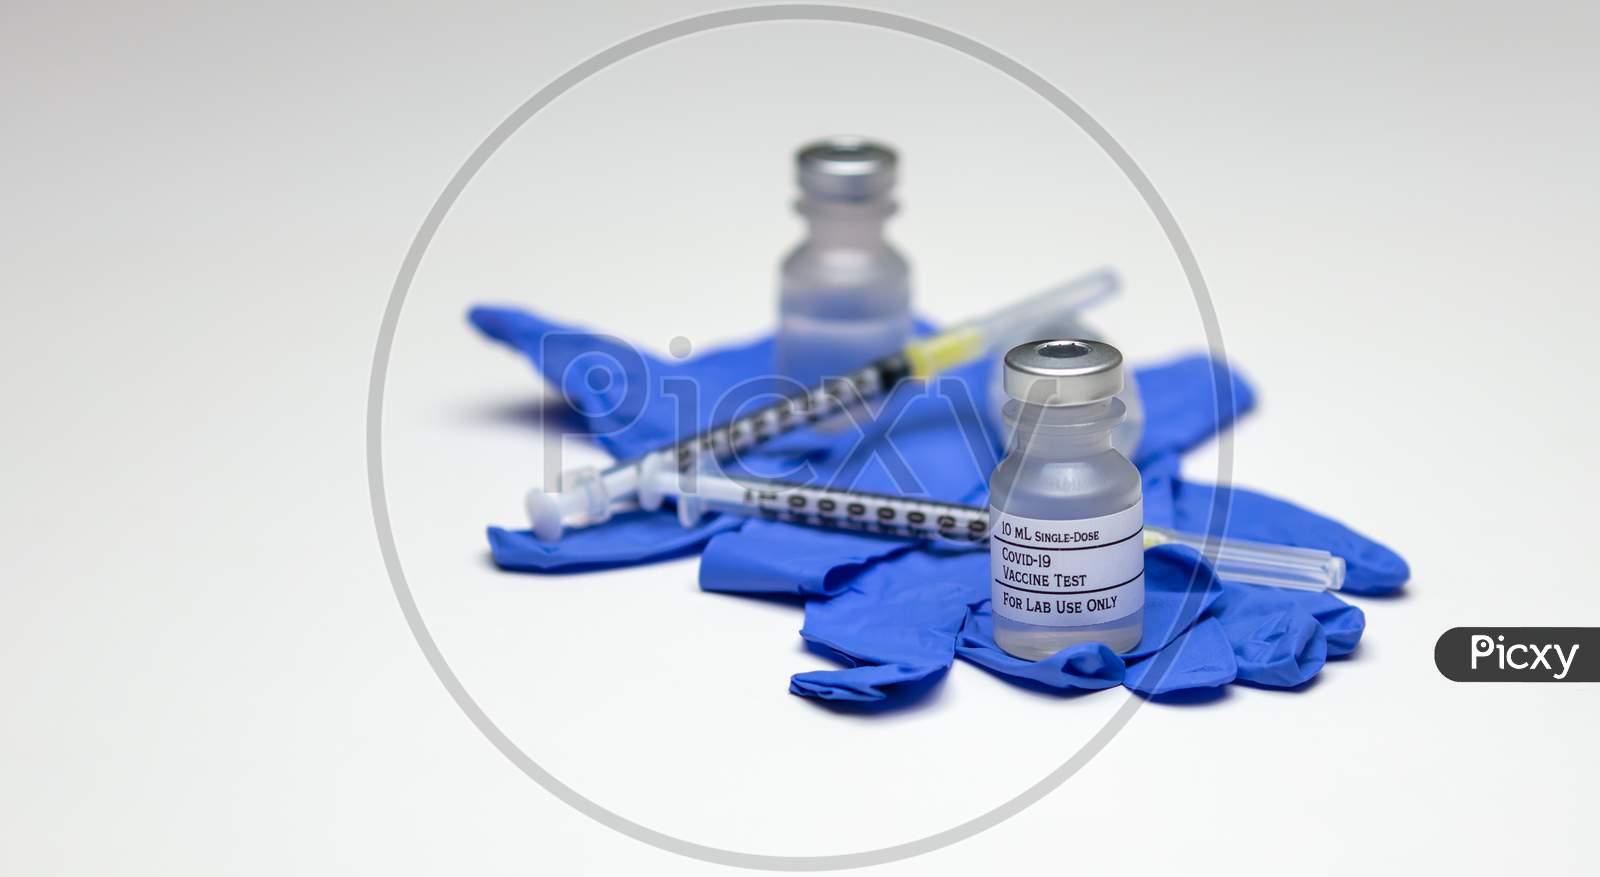 A Pair Of Covid-19 Test Vaccine Vials On Top Of Blue Rubber Medical Gloves With Syringes.